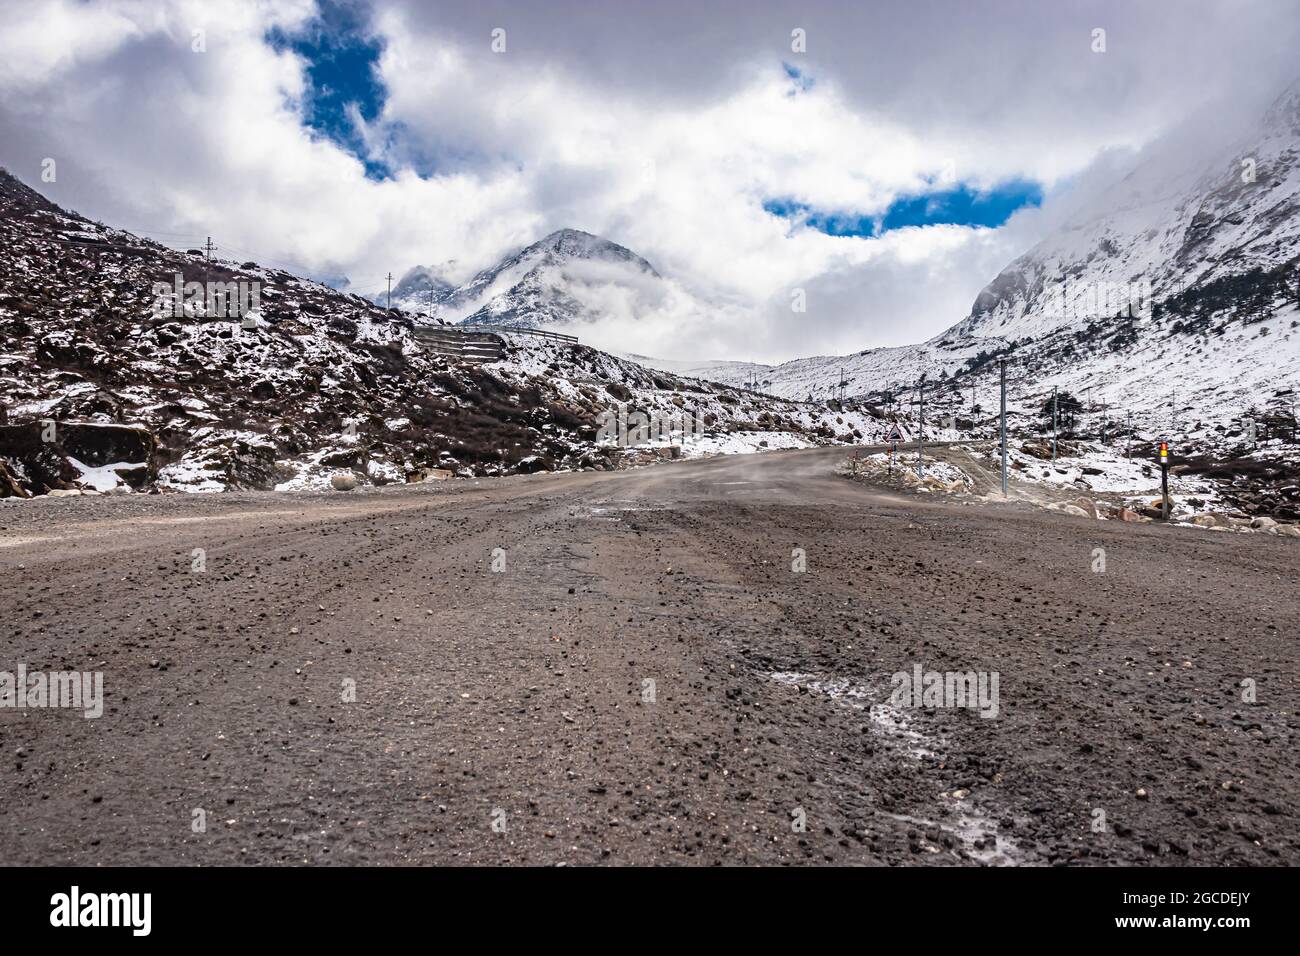 isolated tarmac road with snow cap mountain background and amazing sky at morning image is taken at sela pass tawang arunachal pradesh. Stock Photo